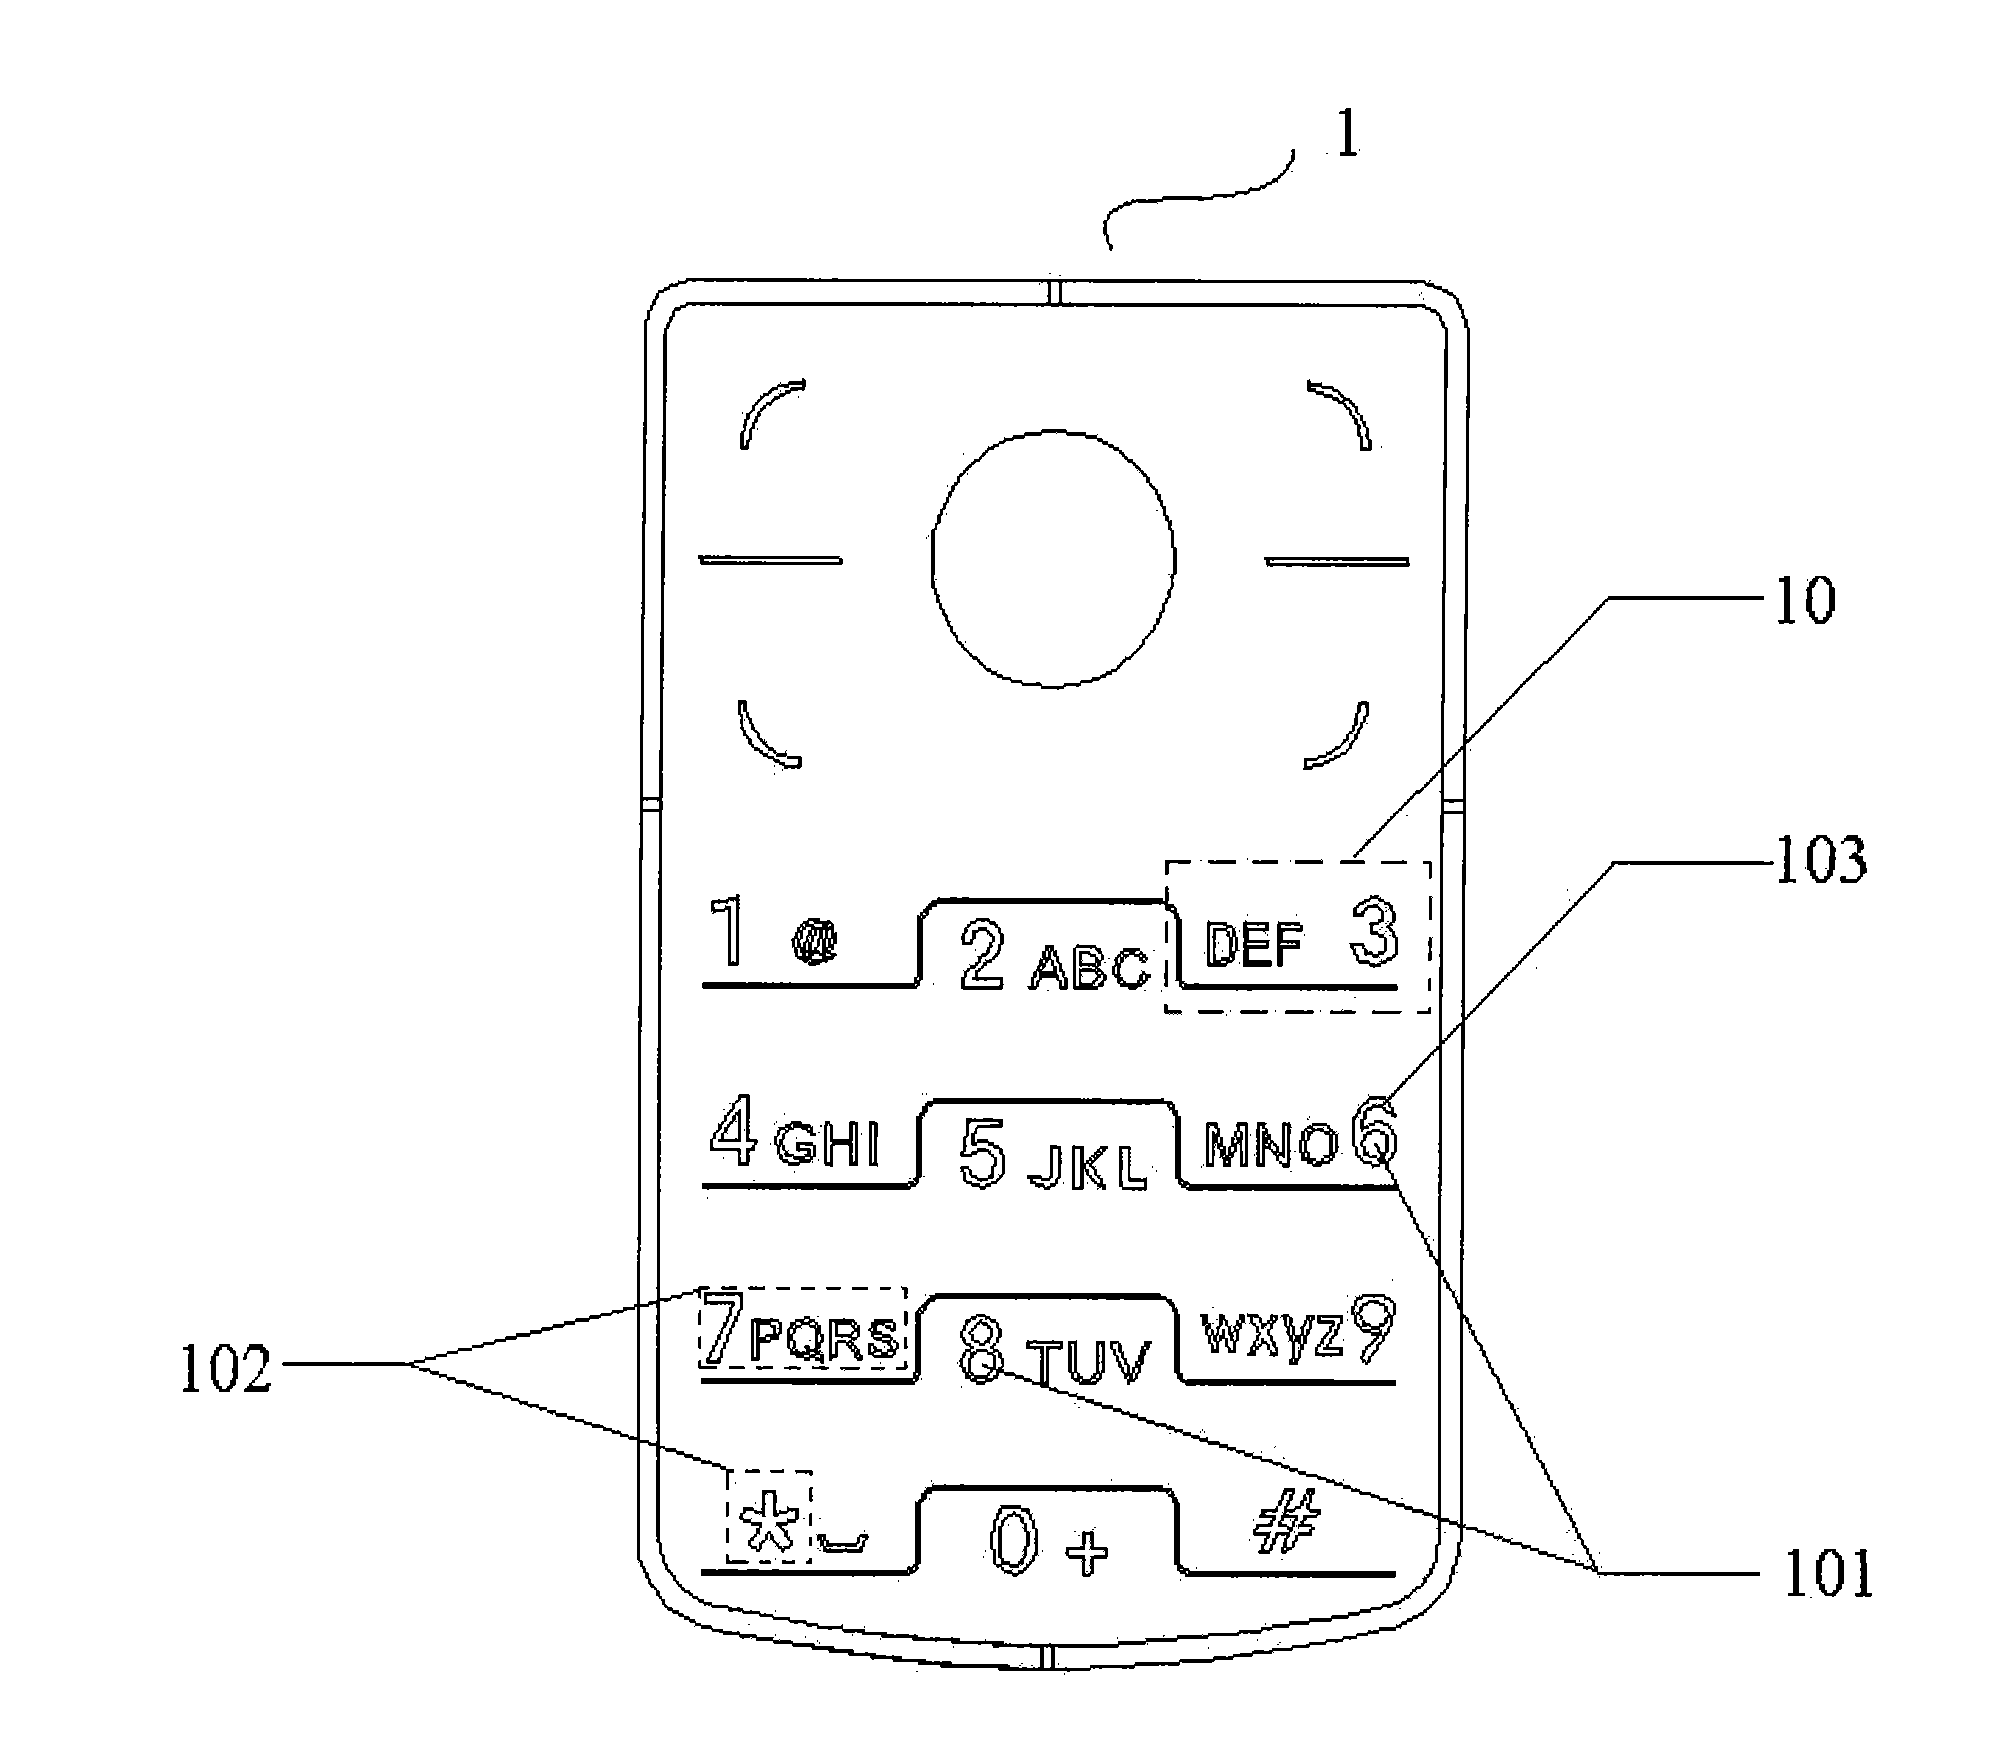 Key, keyboard, manufacturing method for keyboard and mobile phone with keyboard